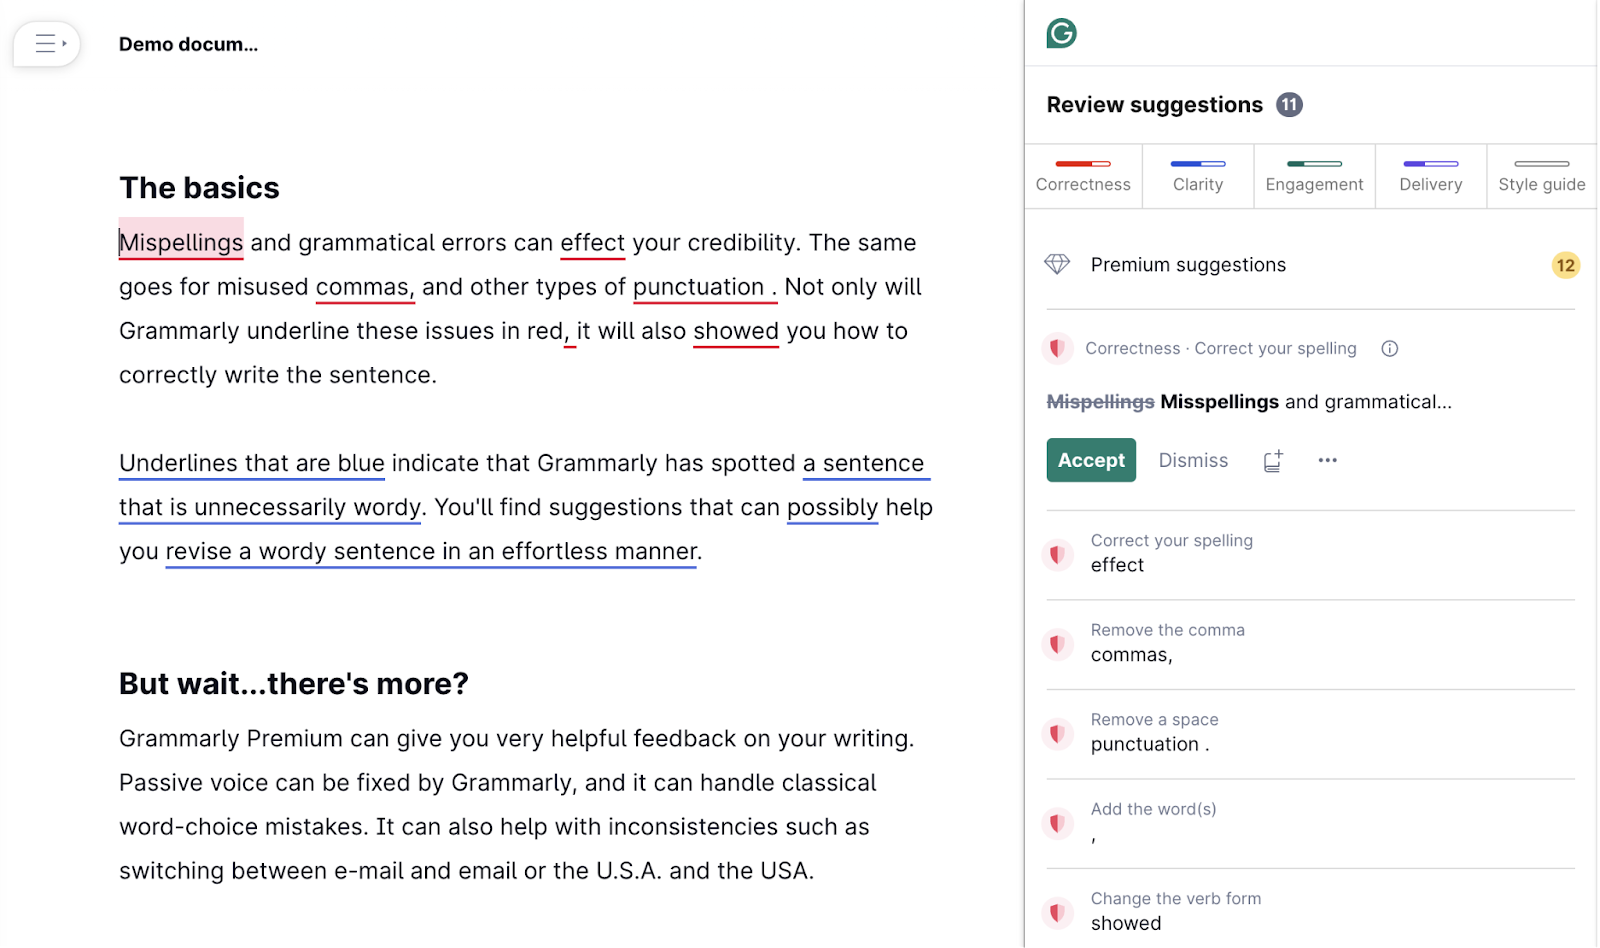 Grammarly demo papers  showing substance   with grammar suggestions.